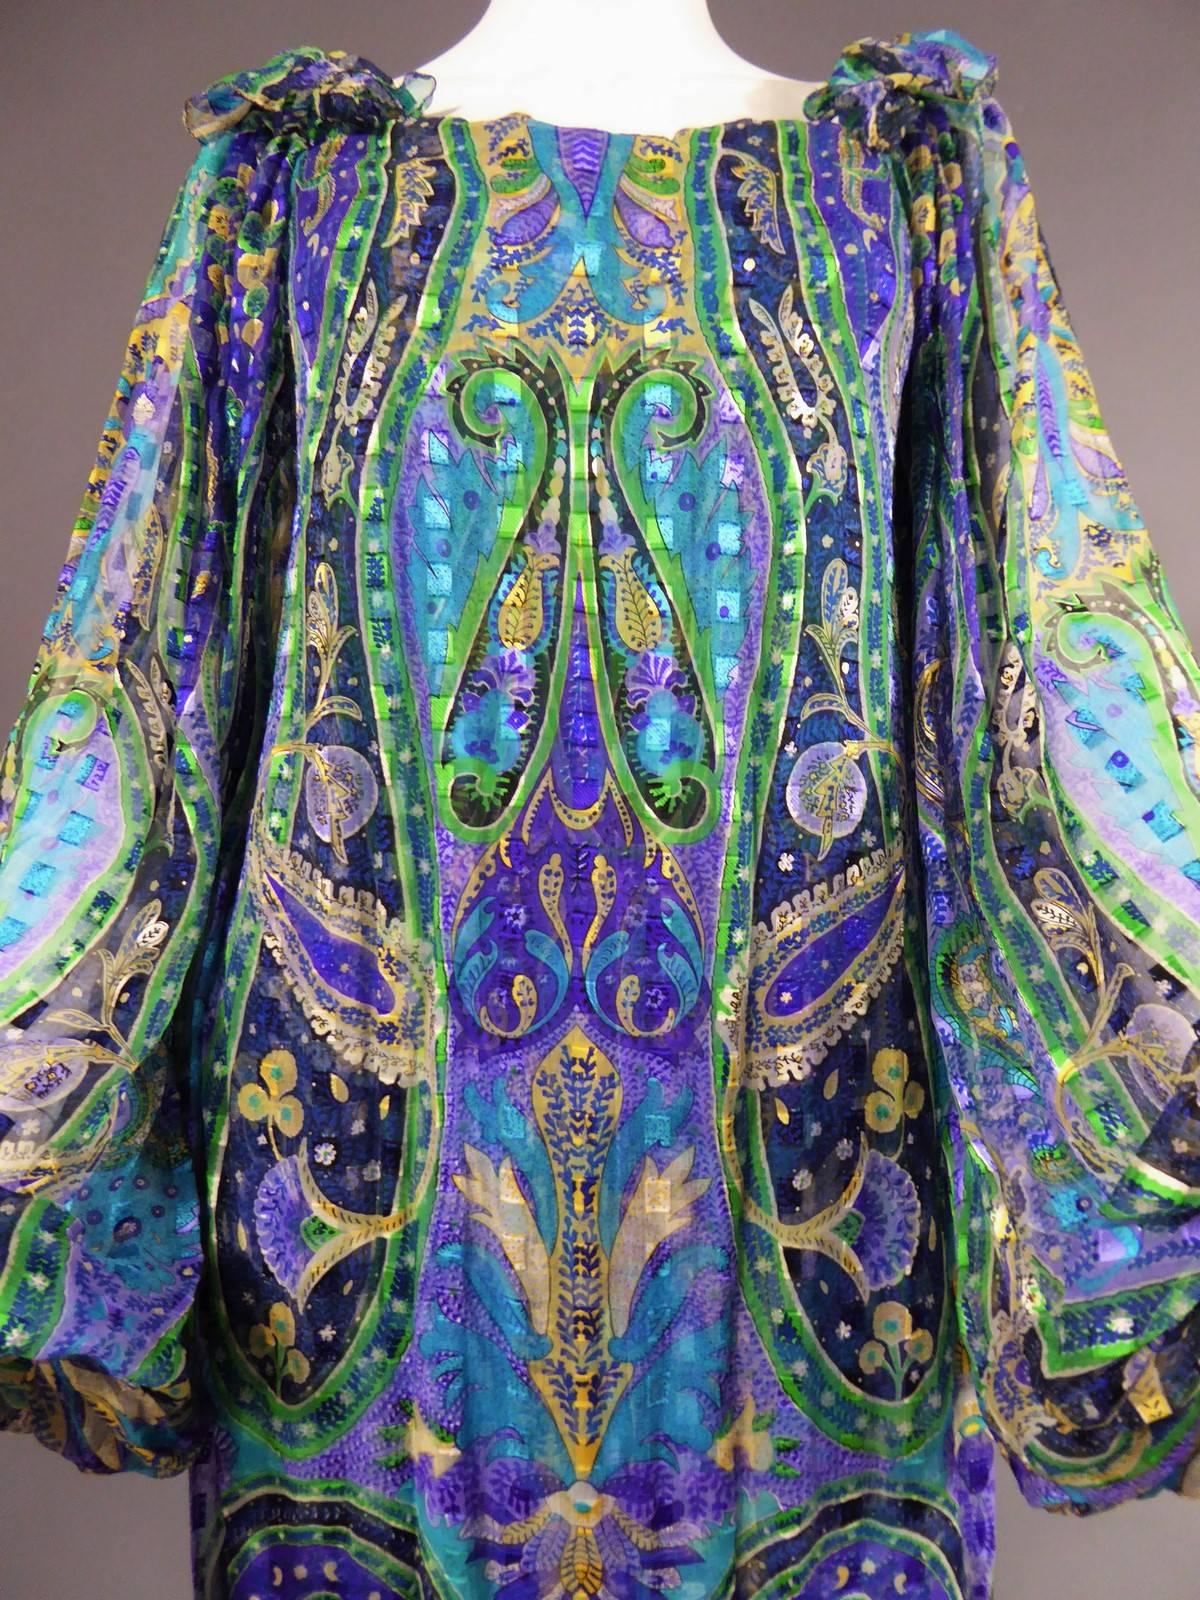 Circa 1970.

France

Carven long dress. Under dress in turquoise blue jersey with a split on the left side. Printed silk dress with Paisley pattern and botehs in the colors of a peacock: blue, purple, yellow, green, black. Rectangle collar. Wide and